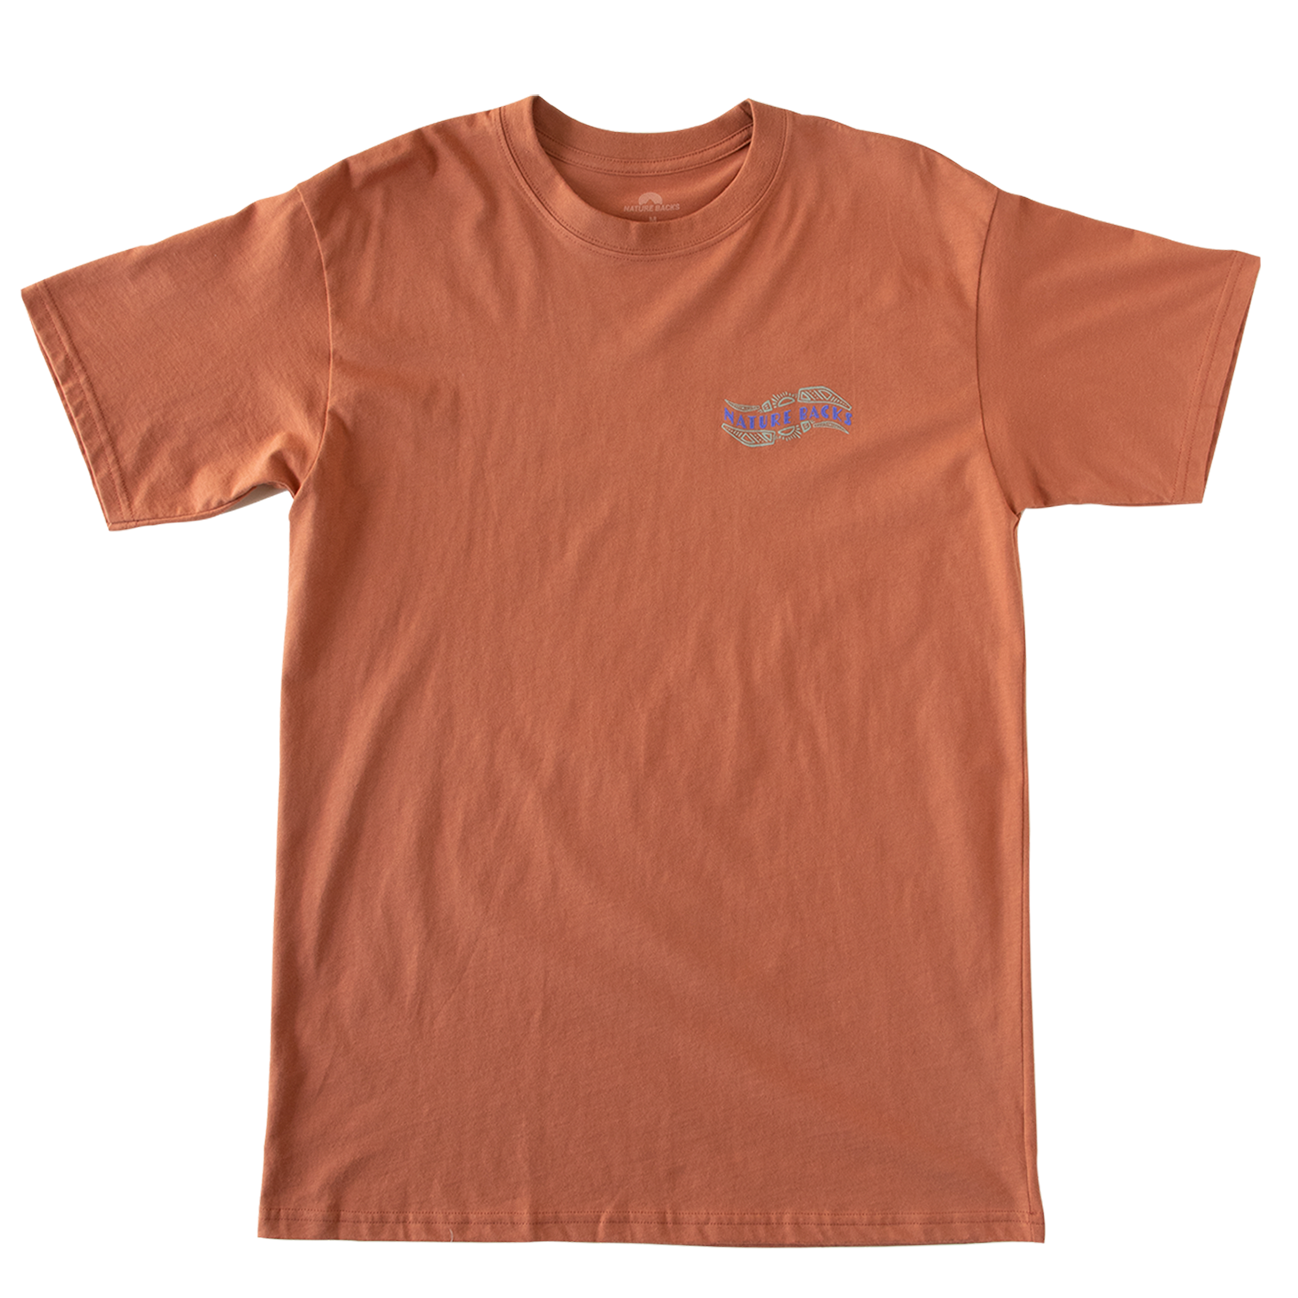 Nature Backs Limited Edition Short Sleeve 100% Organic Cotton T-Shirt | Limited Origin Harvest Short Sleeve made with Eco-Friendly Fibers Sustainably made in the USA 